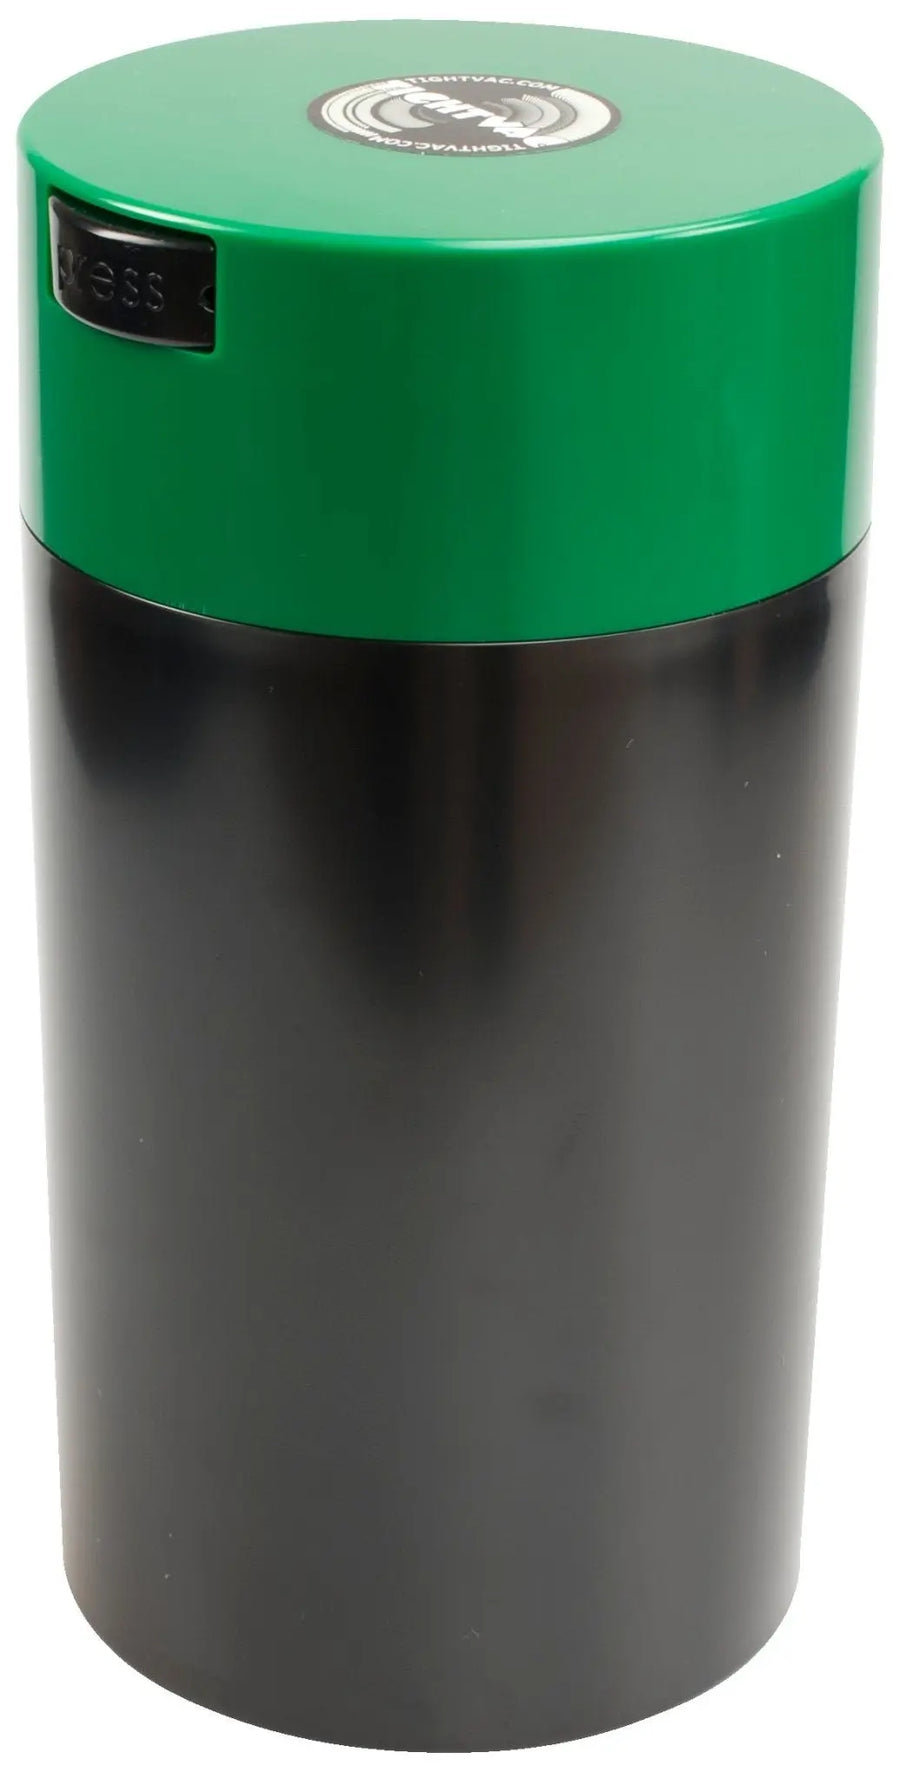 Tightvac 1.3 liter / 340g / Solid / Green Cap - TightVac Europe - The eassiest storage solutions